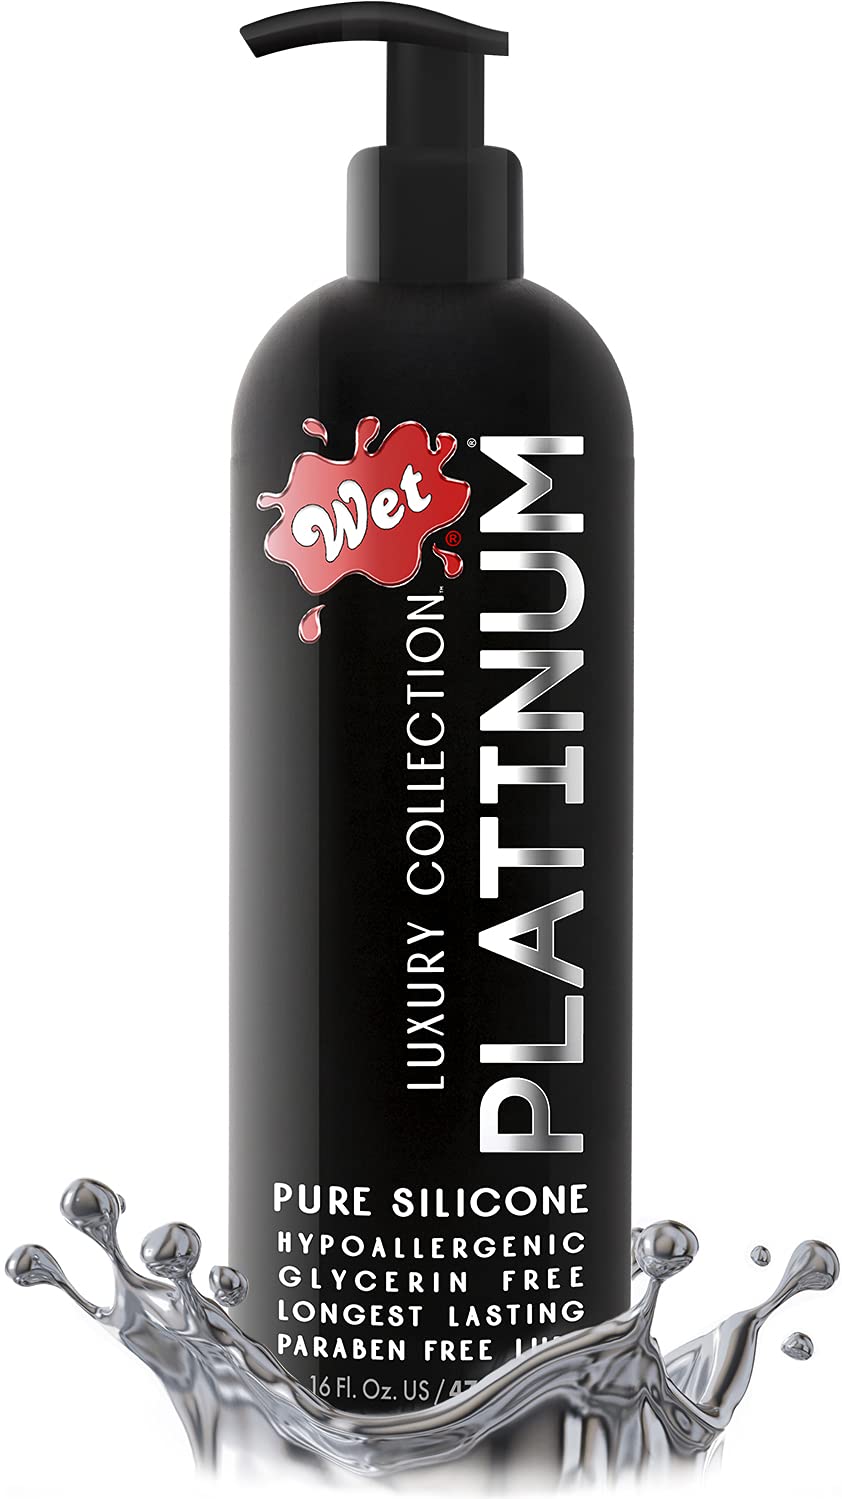 Wet Platinum Silicone Based Sex Lube 16 Ounce Premium Personal Luxury Lubricant for Men Women & Couples. More Long Lasting Than Water Based. Condom Safe Hypoallergenic Gl - $23.99